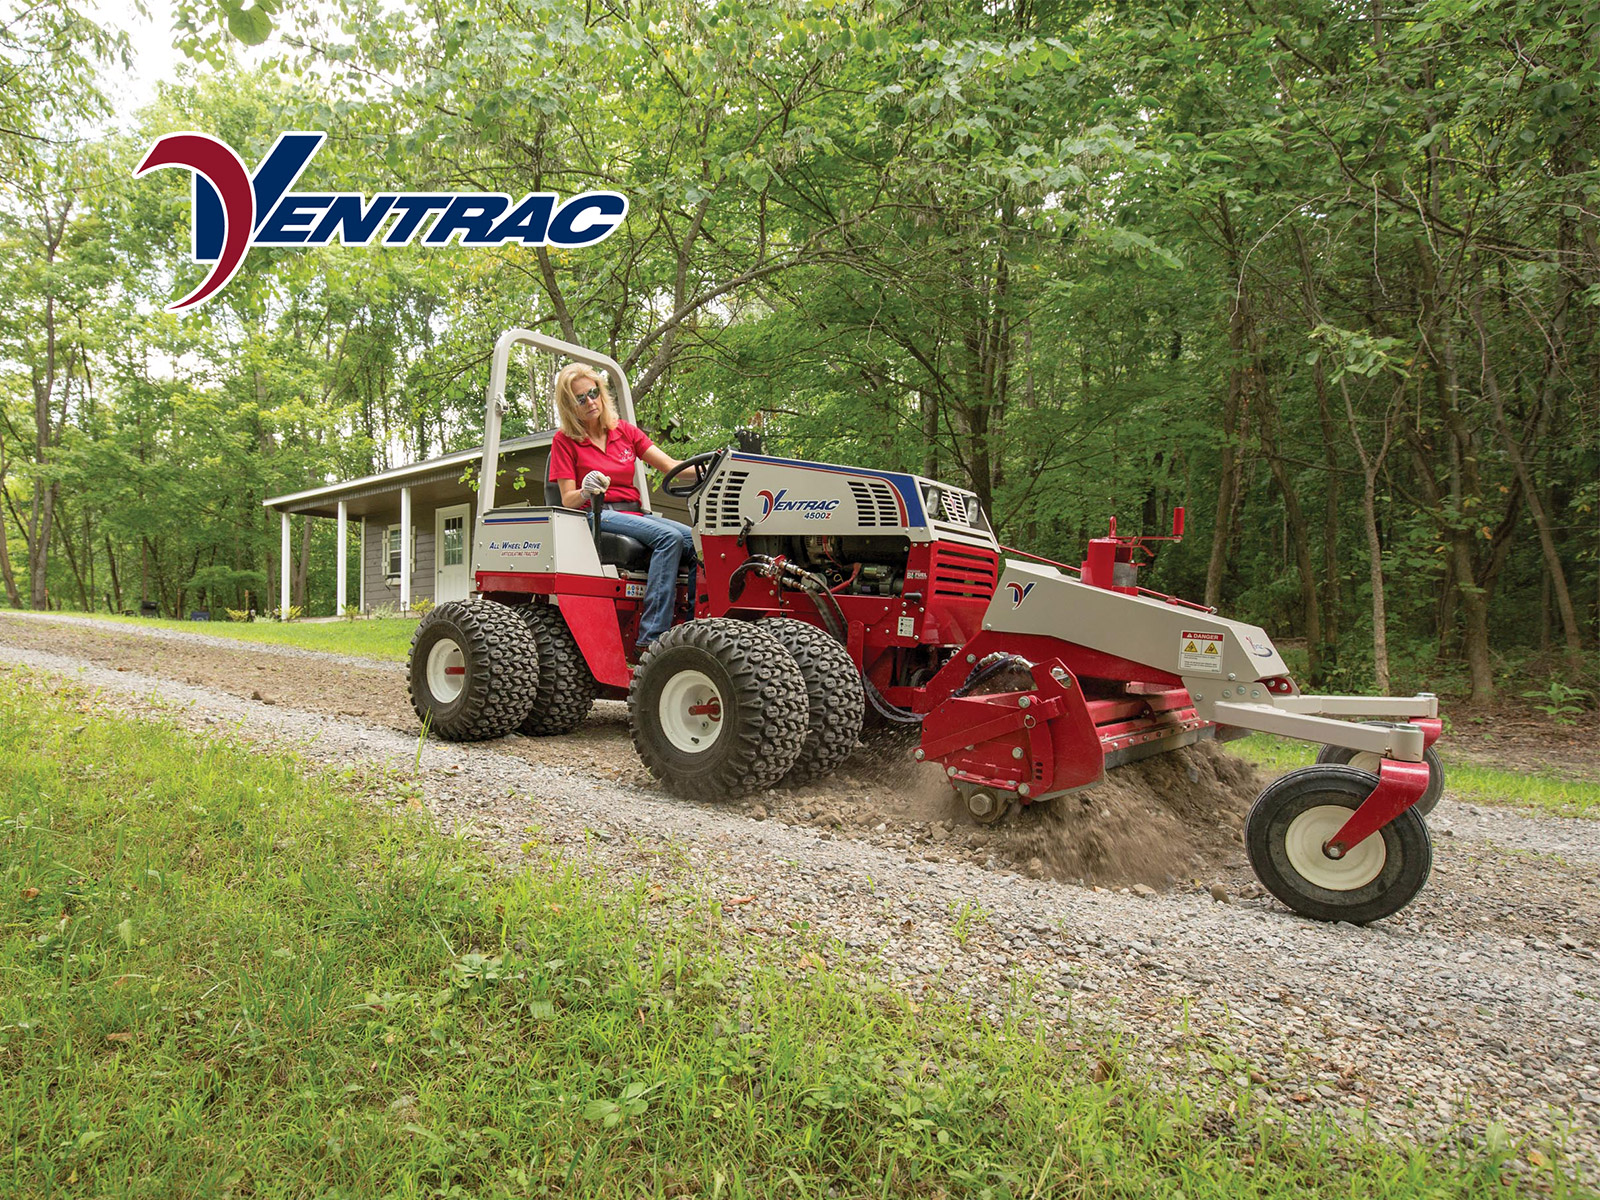 Ventrac 4500P with Tiller